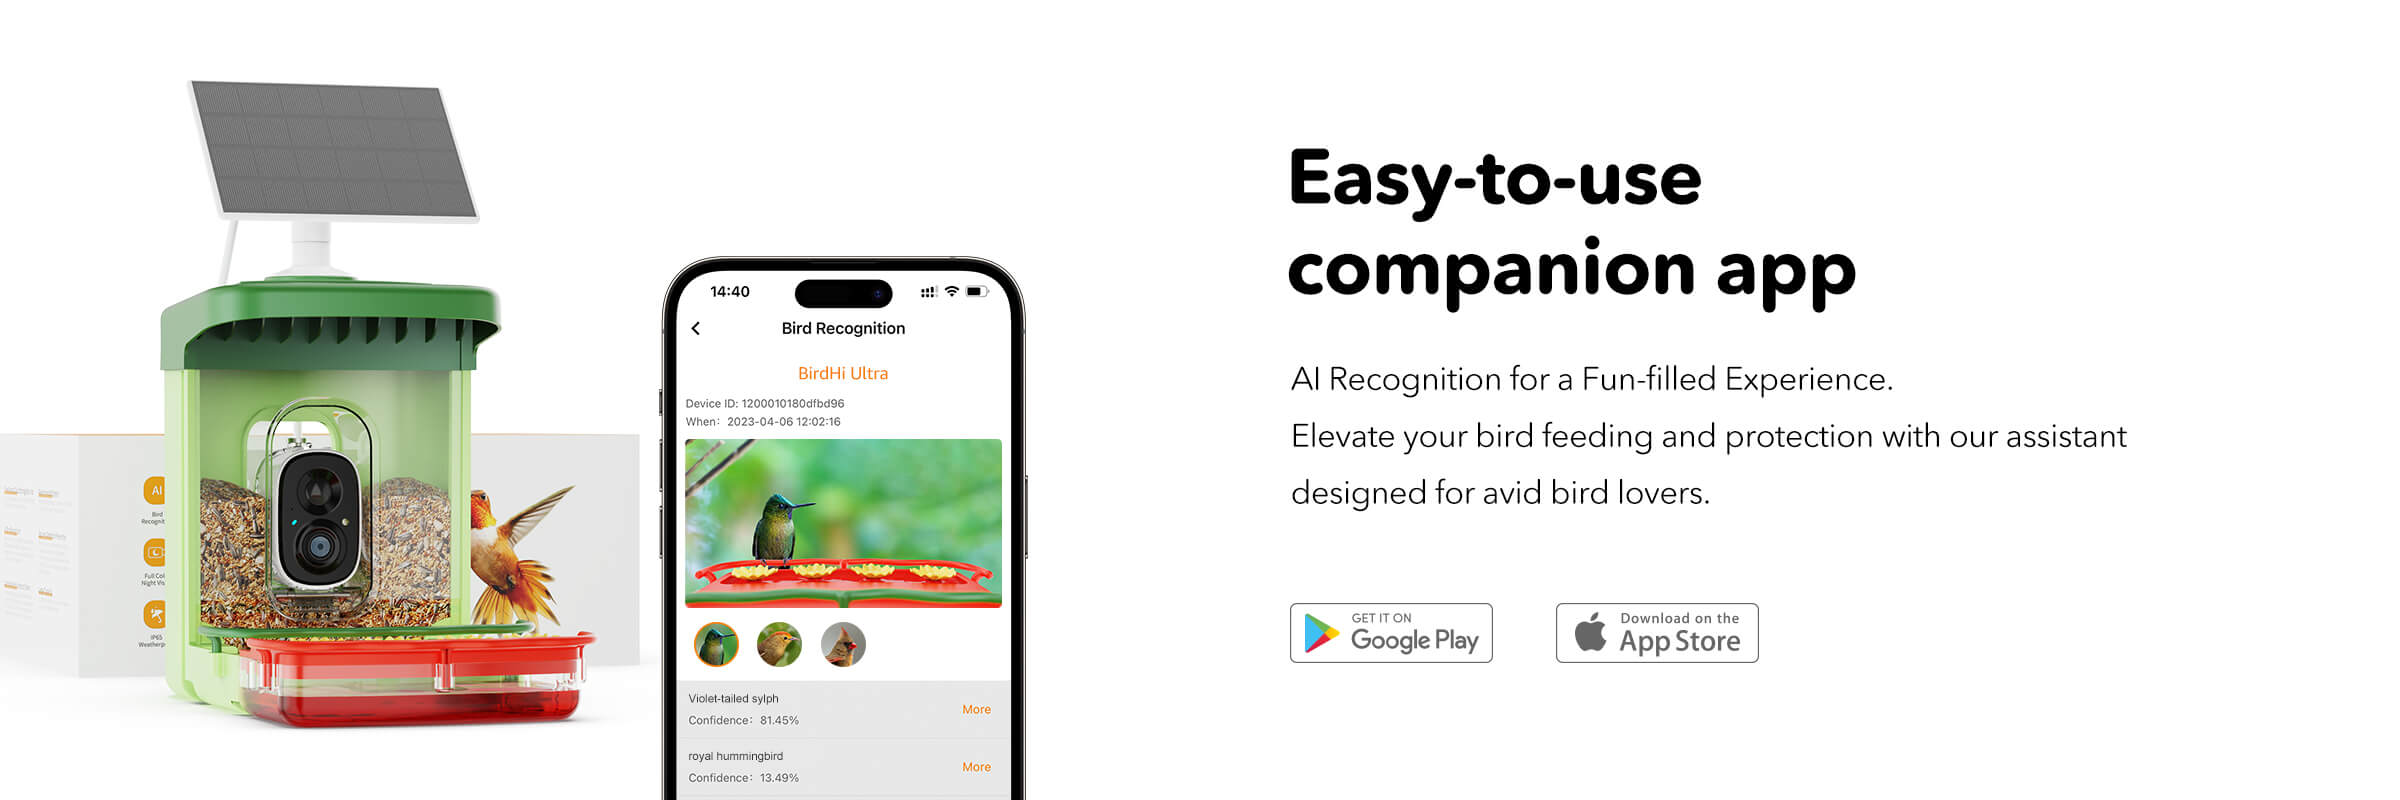 Bilantan APP: AI Recognition for a Fun-filled Experience. Elevate your bird feeding and protection with our assistant designed for avid bird lovers.